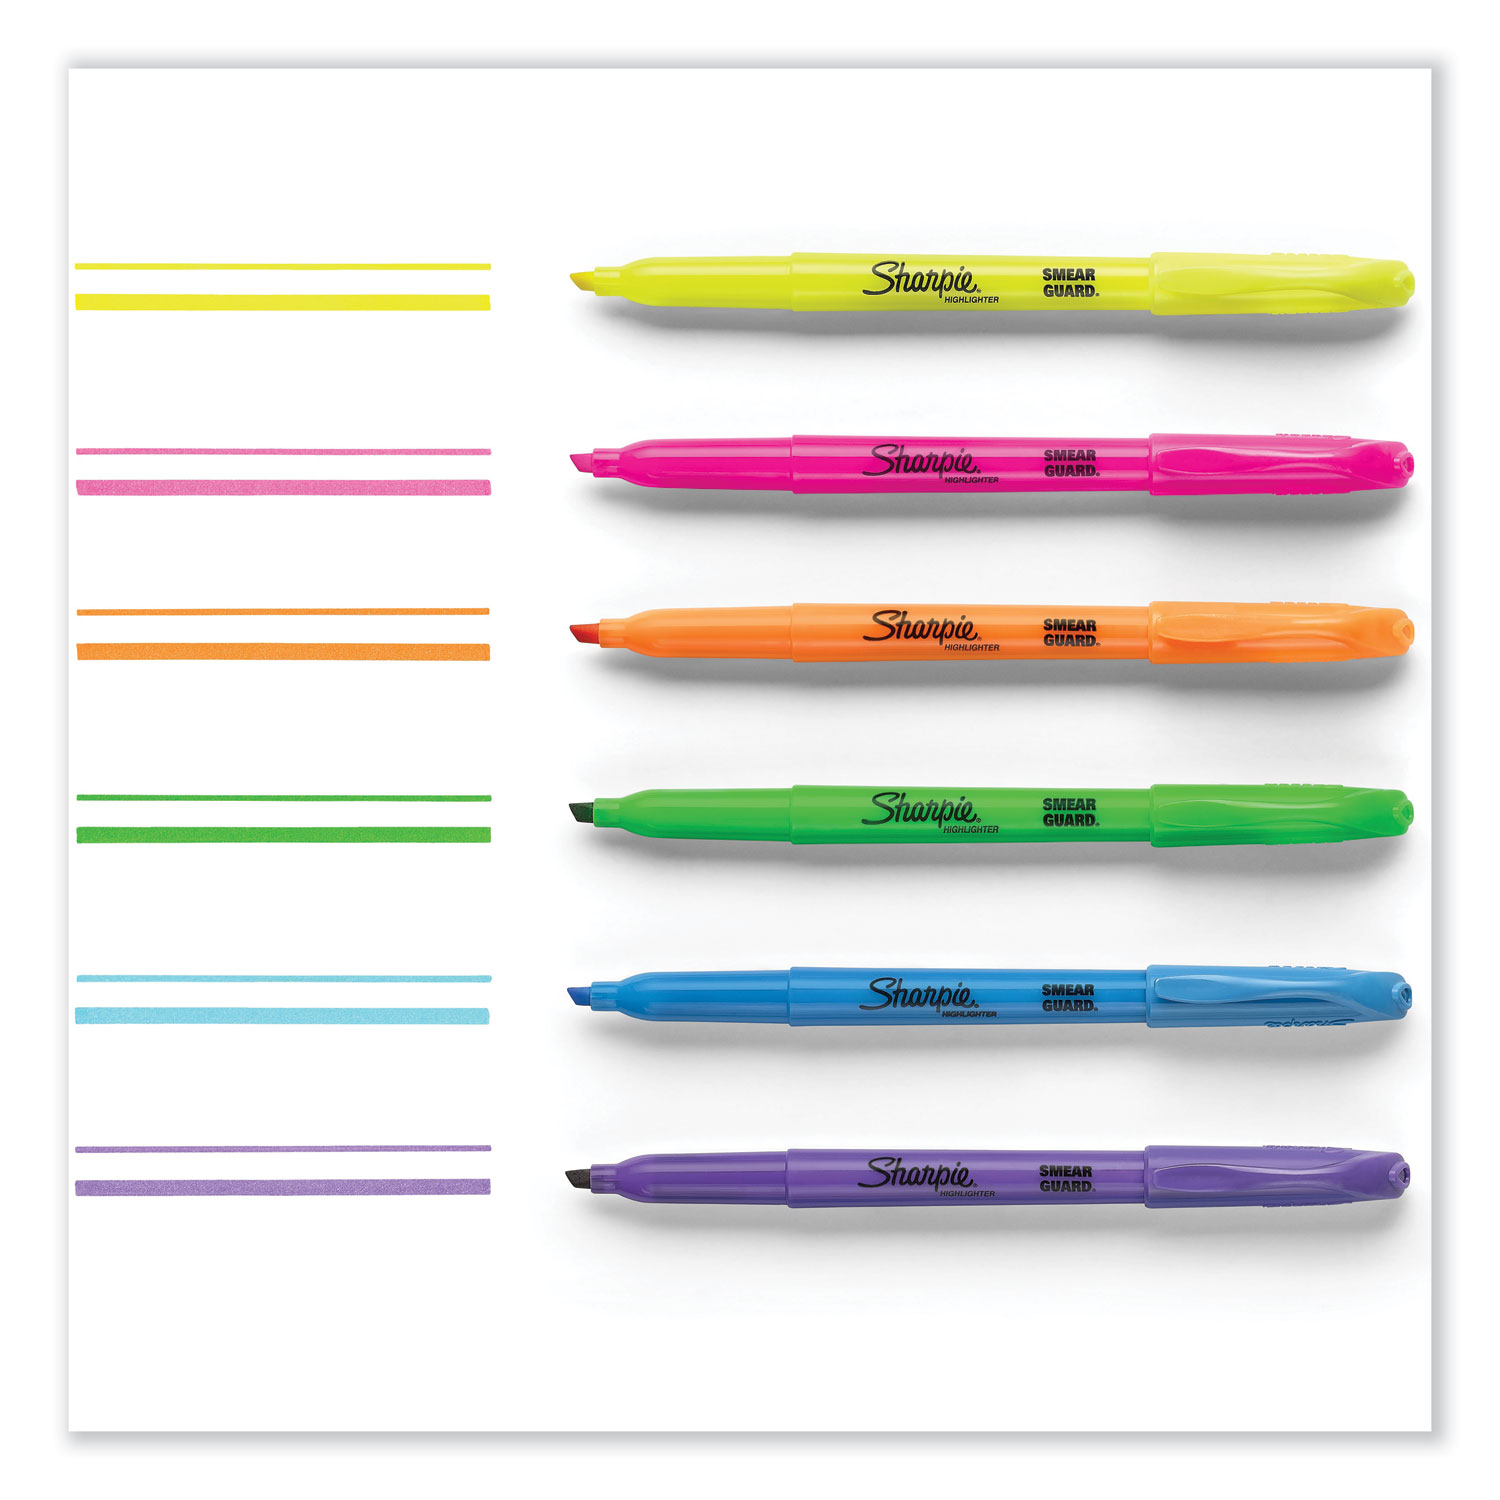 S-Note Creative Markers, Assorted Ink Colors, Chisel Tip, Assorted